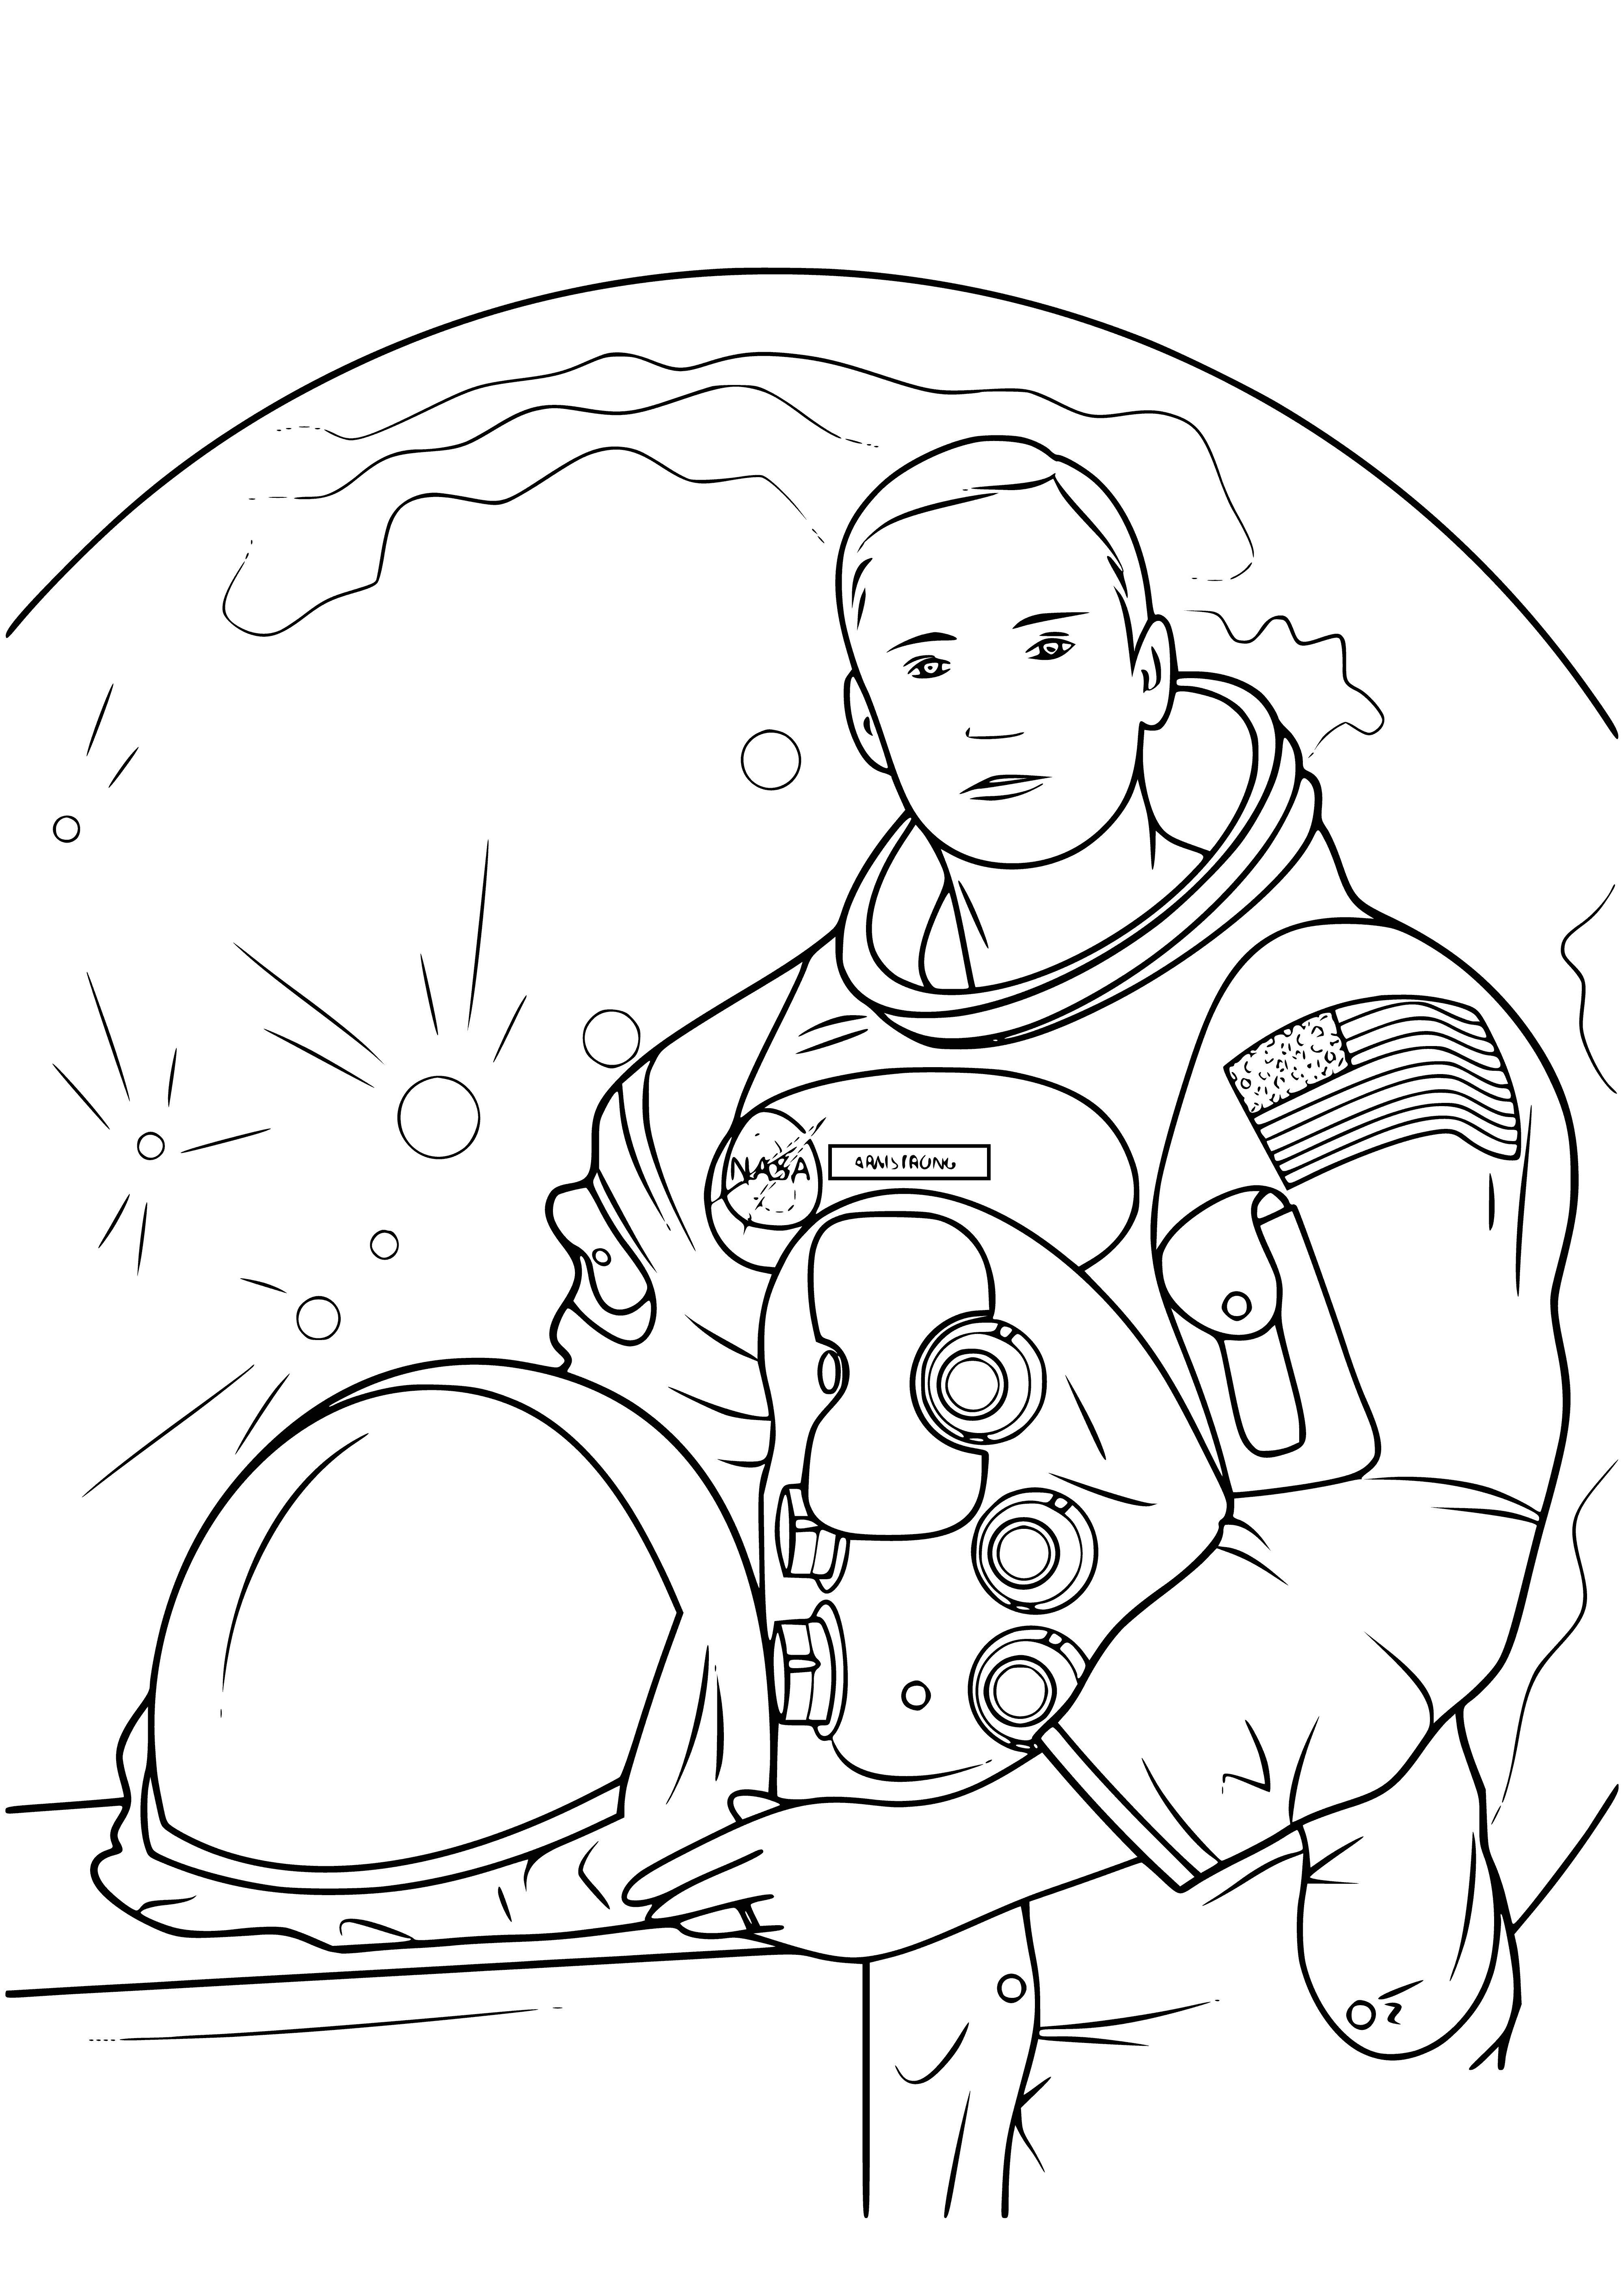 Neil Armstrong coloring page